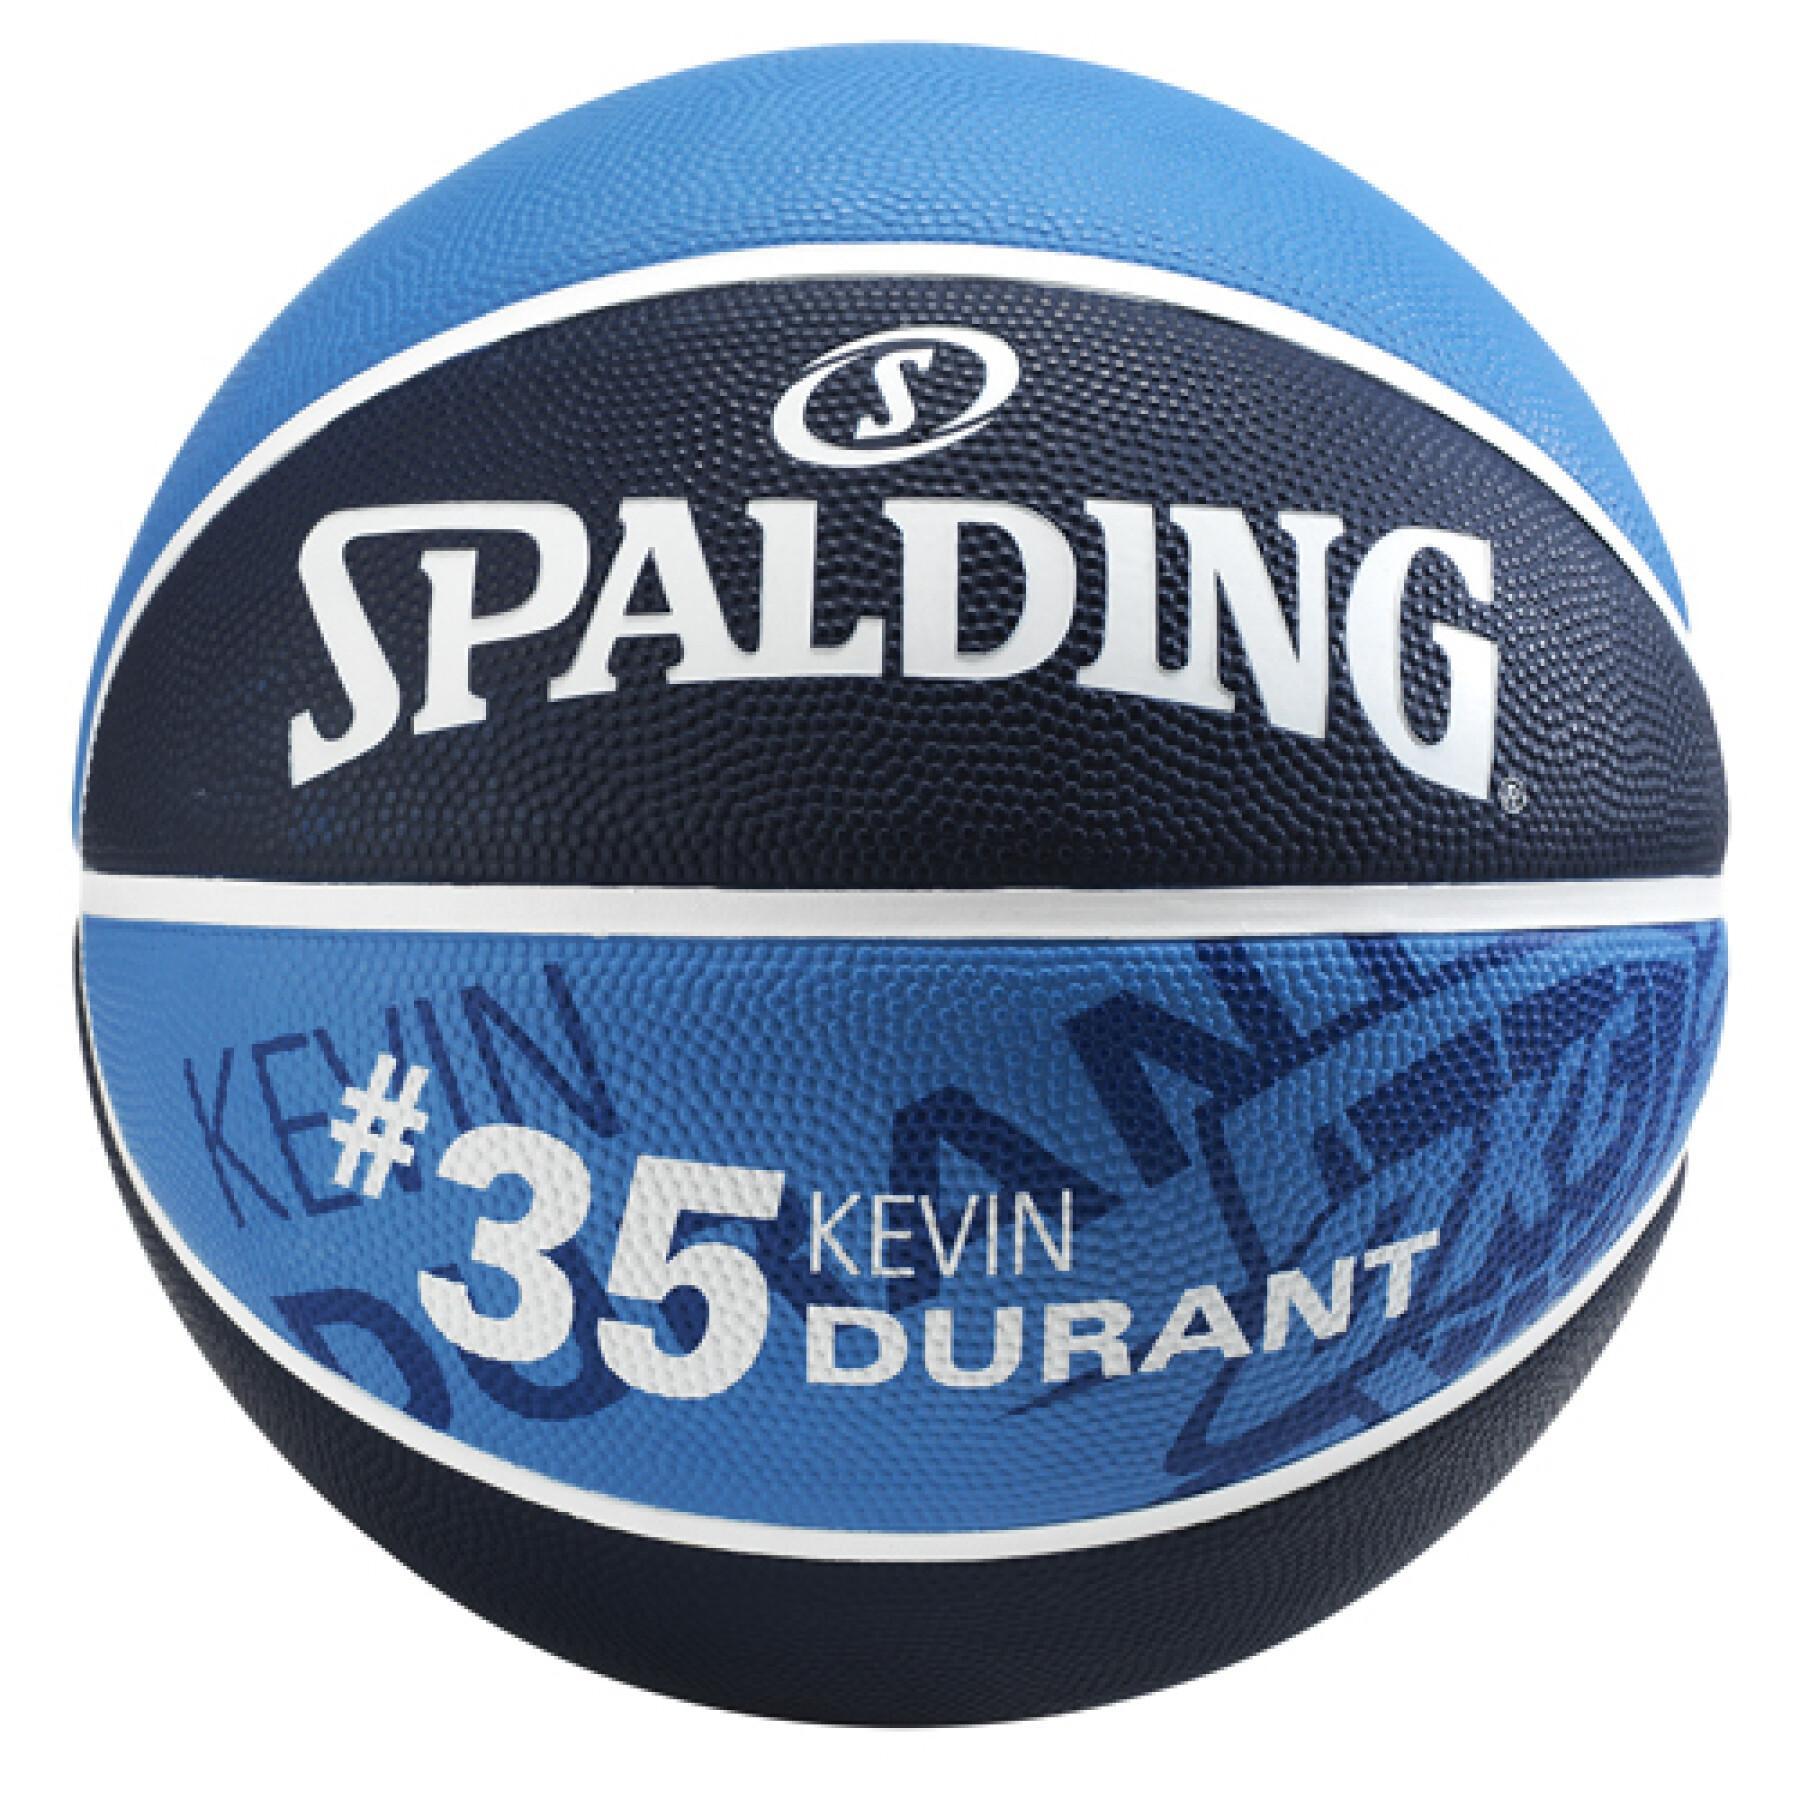 Balloon Spalding Player Kevin Durant